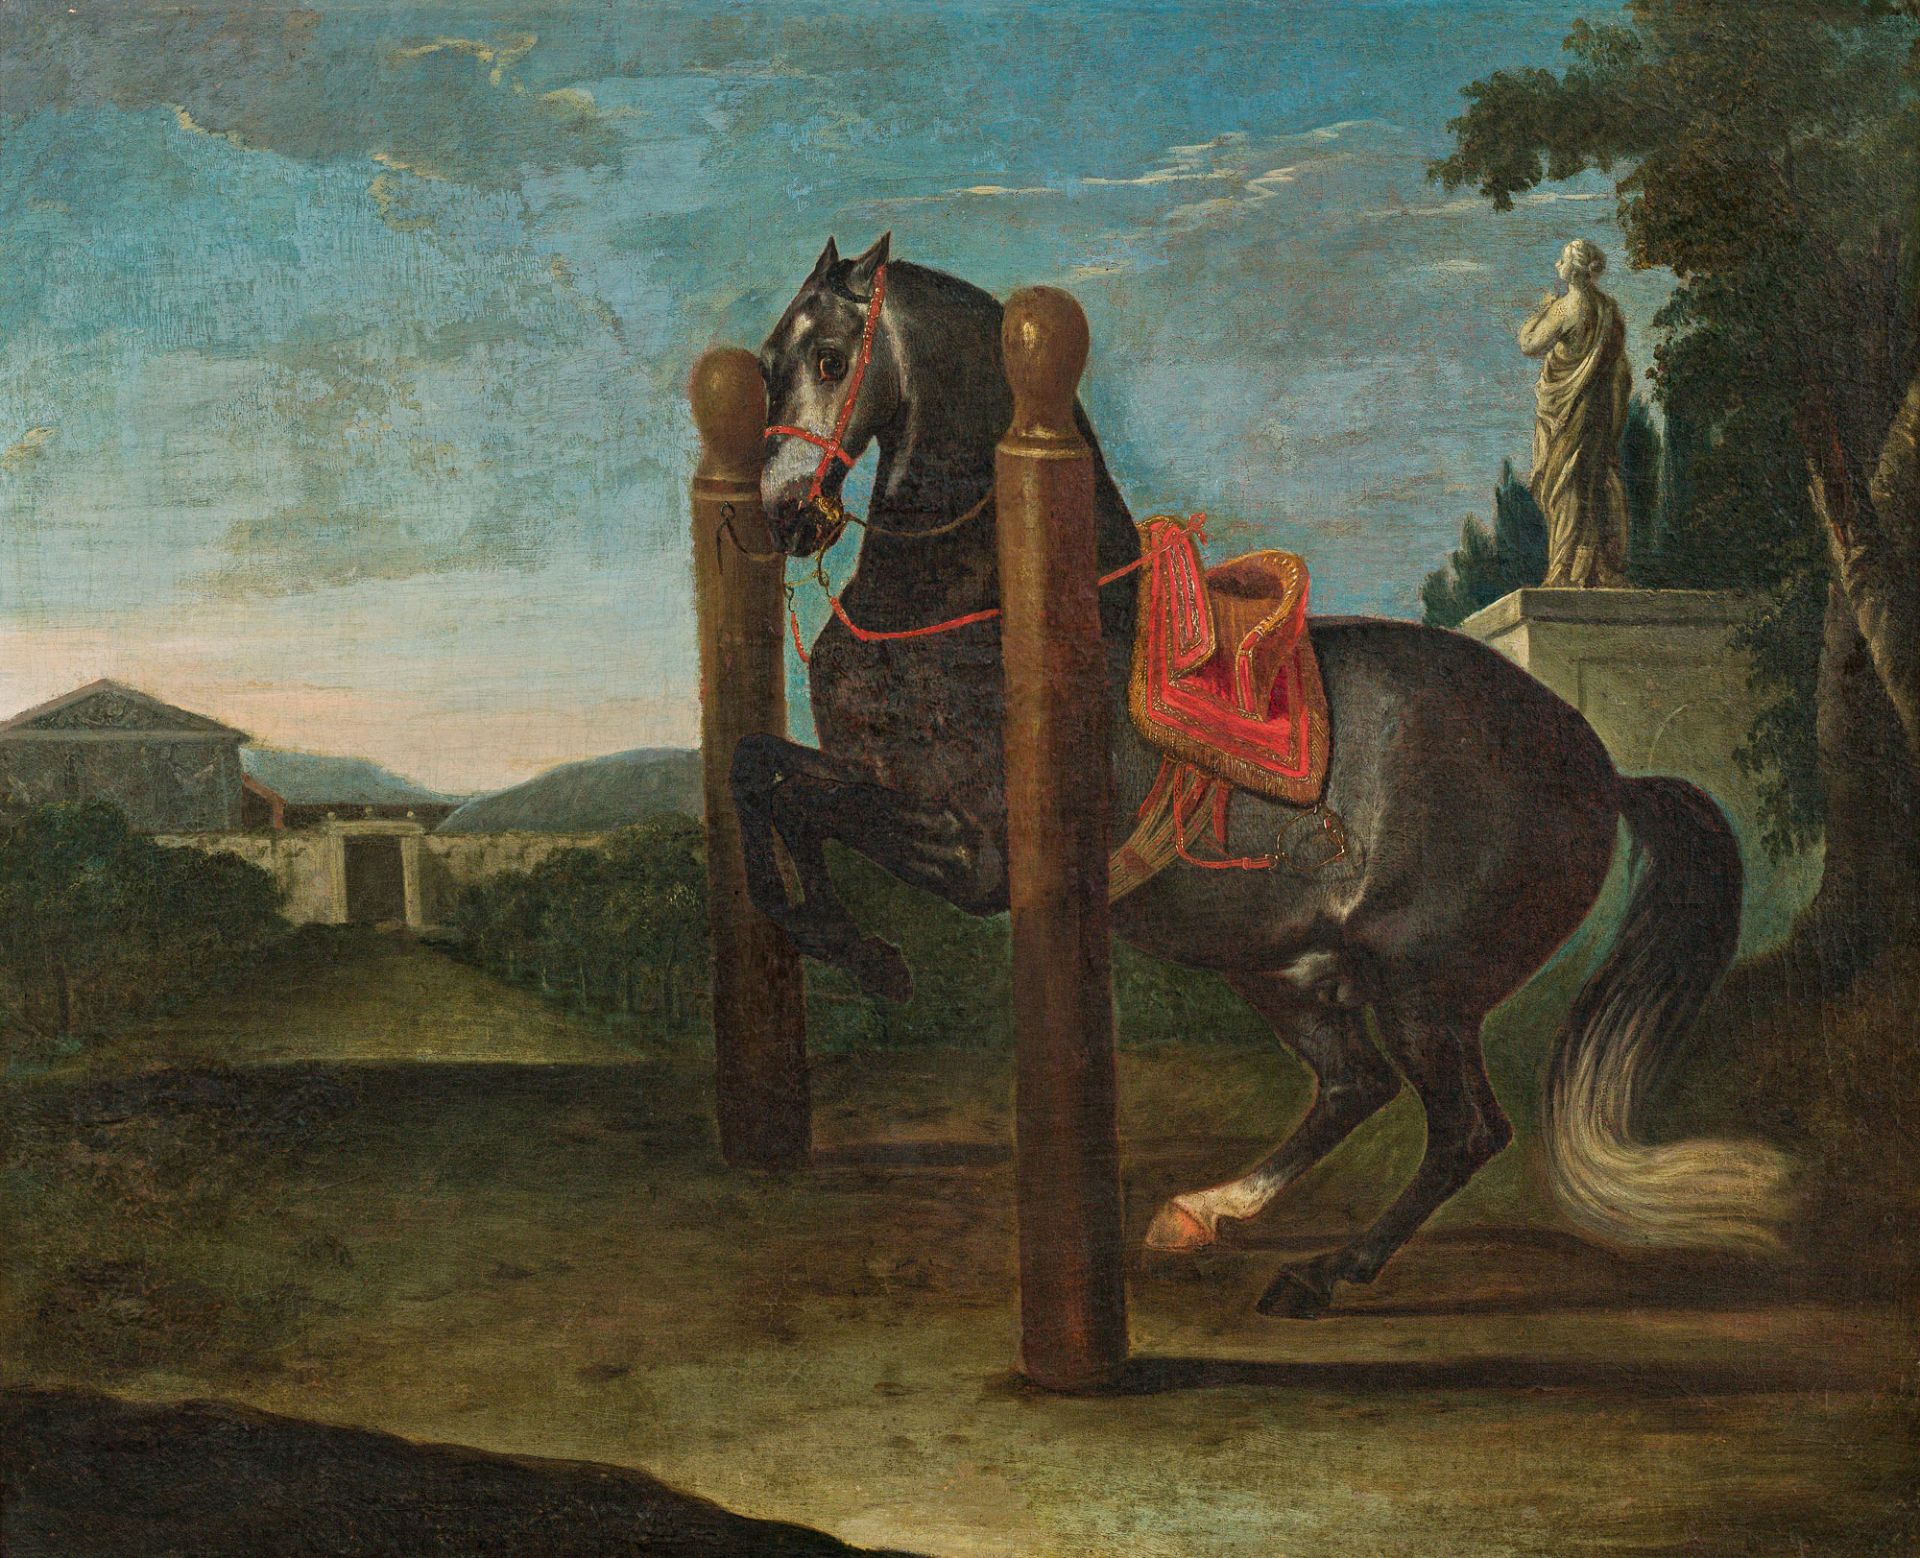 Johann P. Leopold AxtmannHorse in Levadec. 1730oil on canvas49.5 x 60.5 cmformerly in the collection